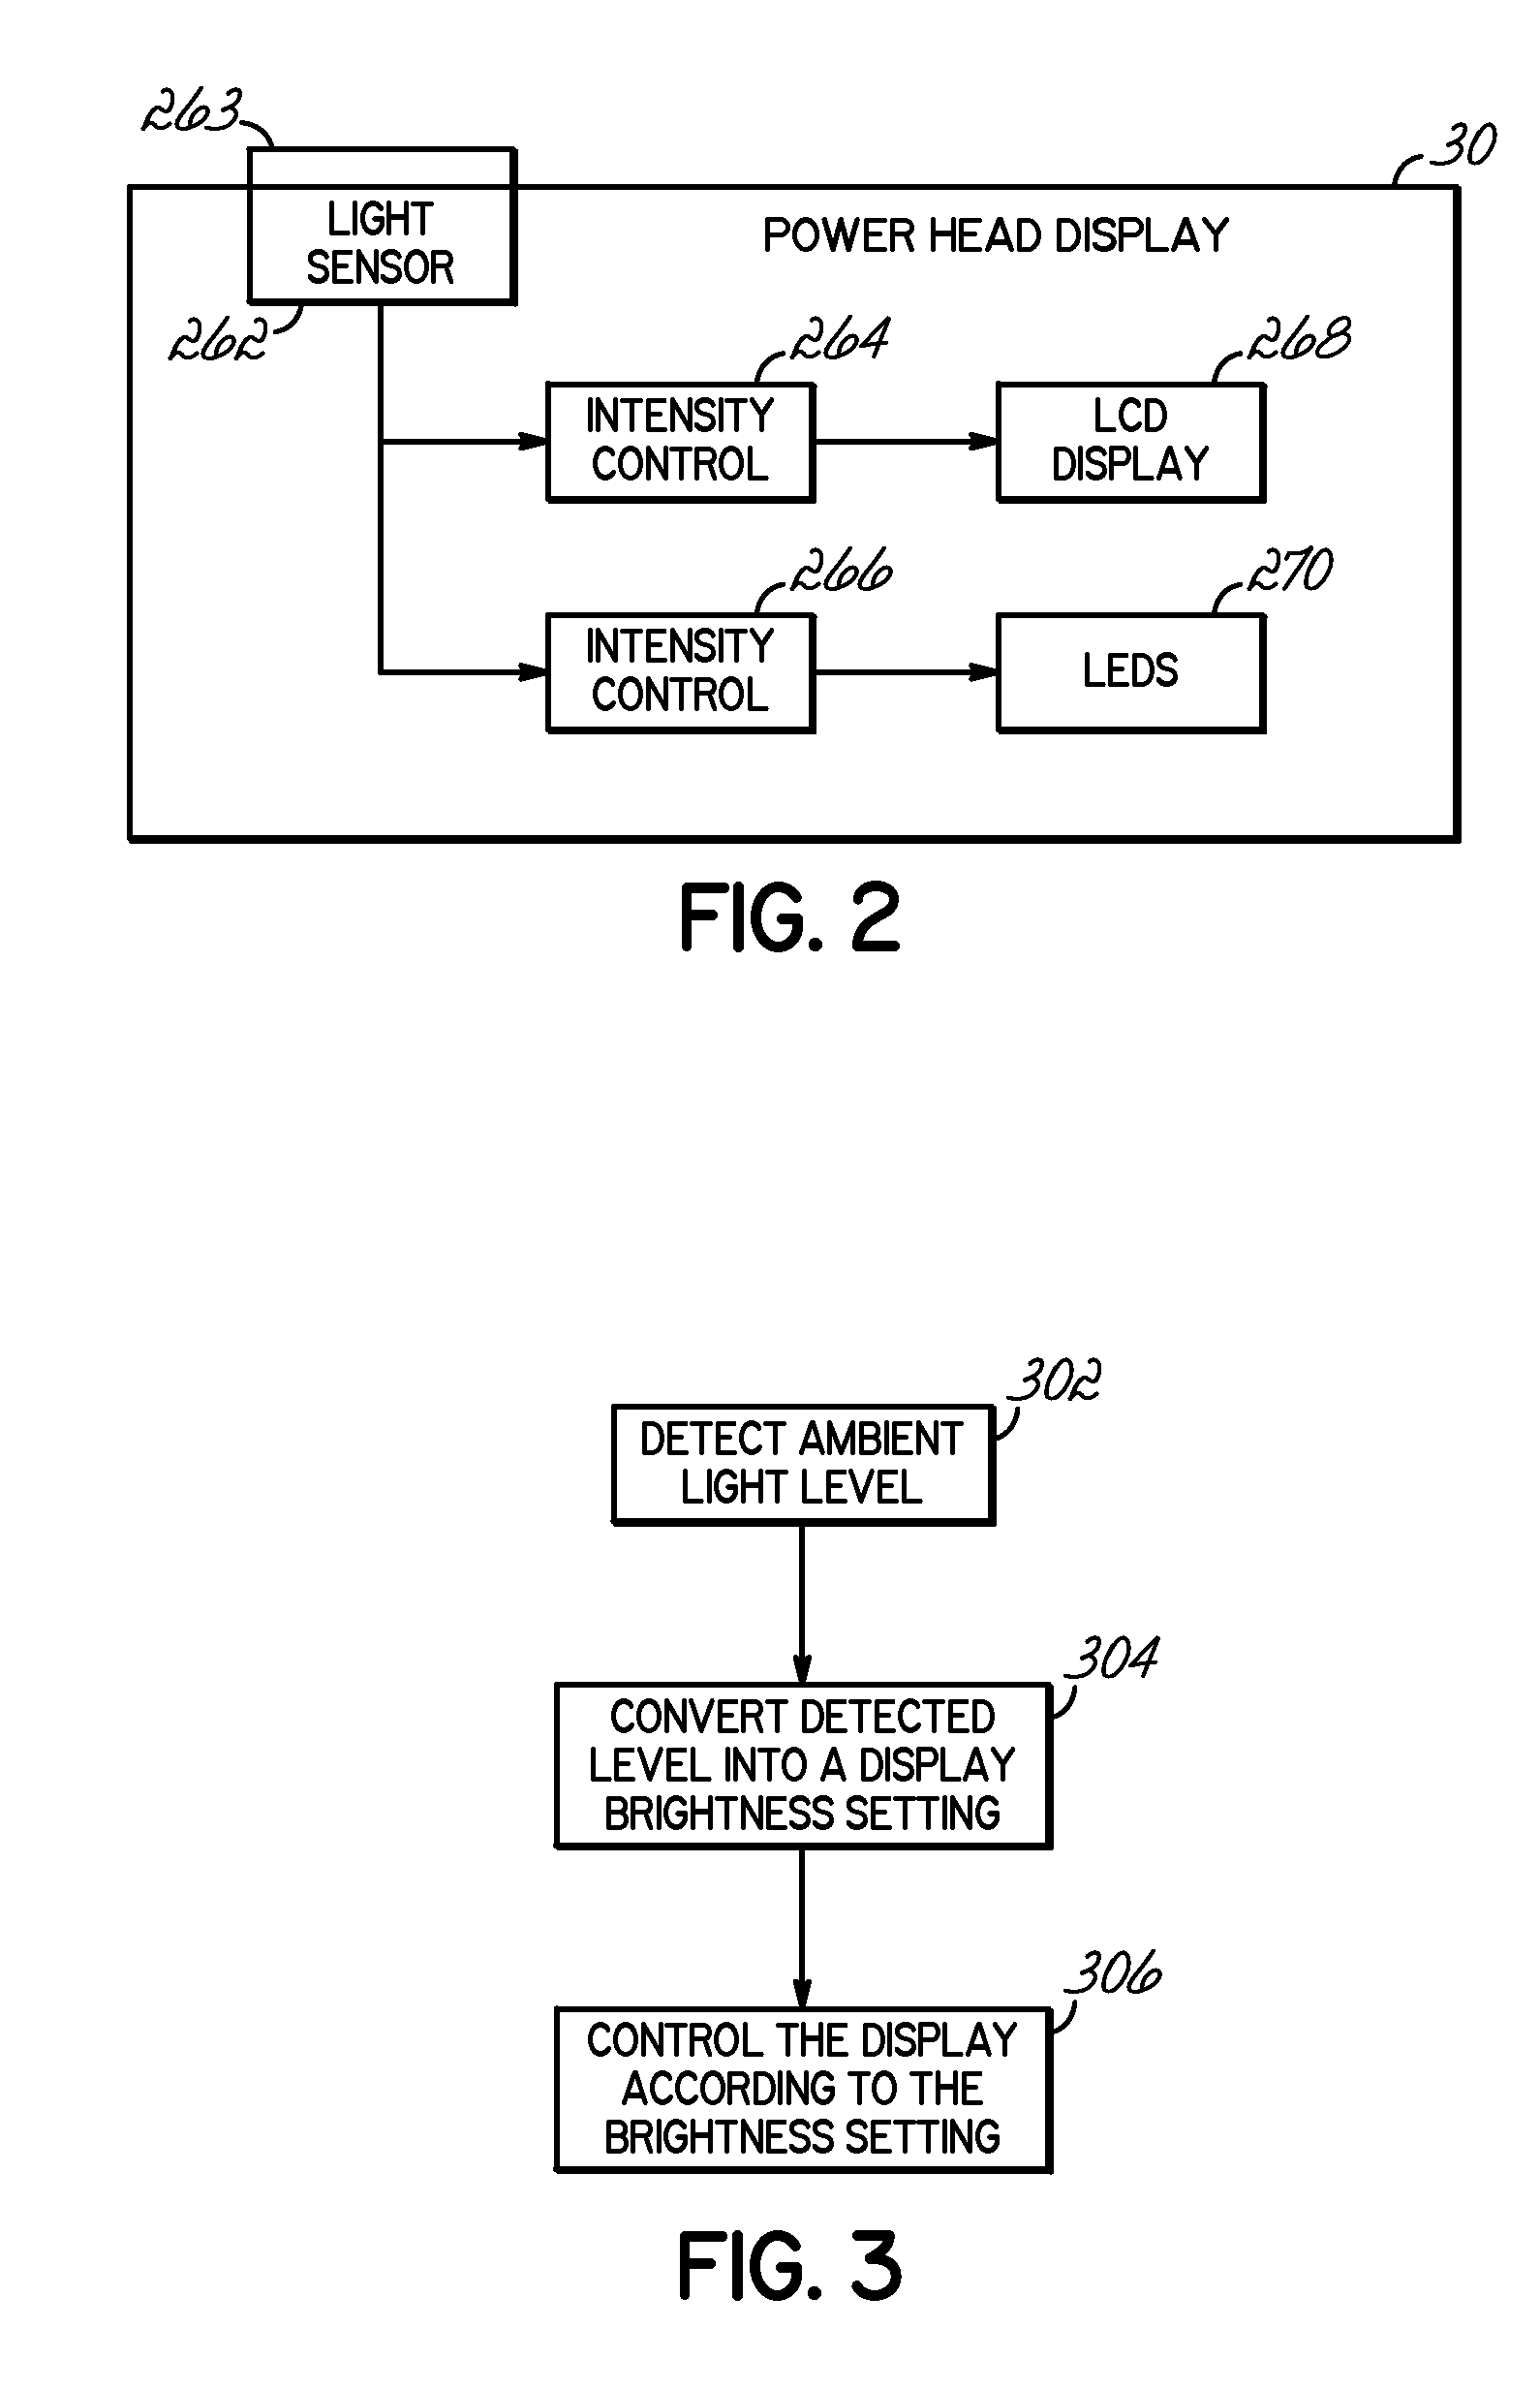 Powerhead Control in a Power Injection System